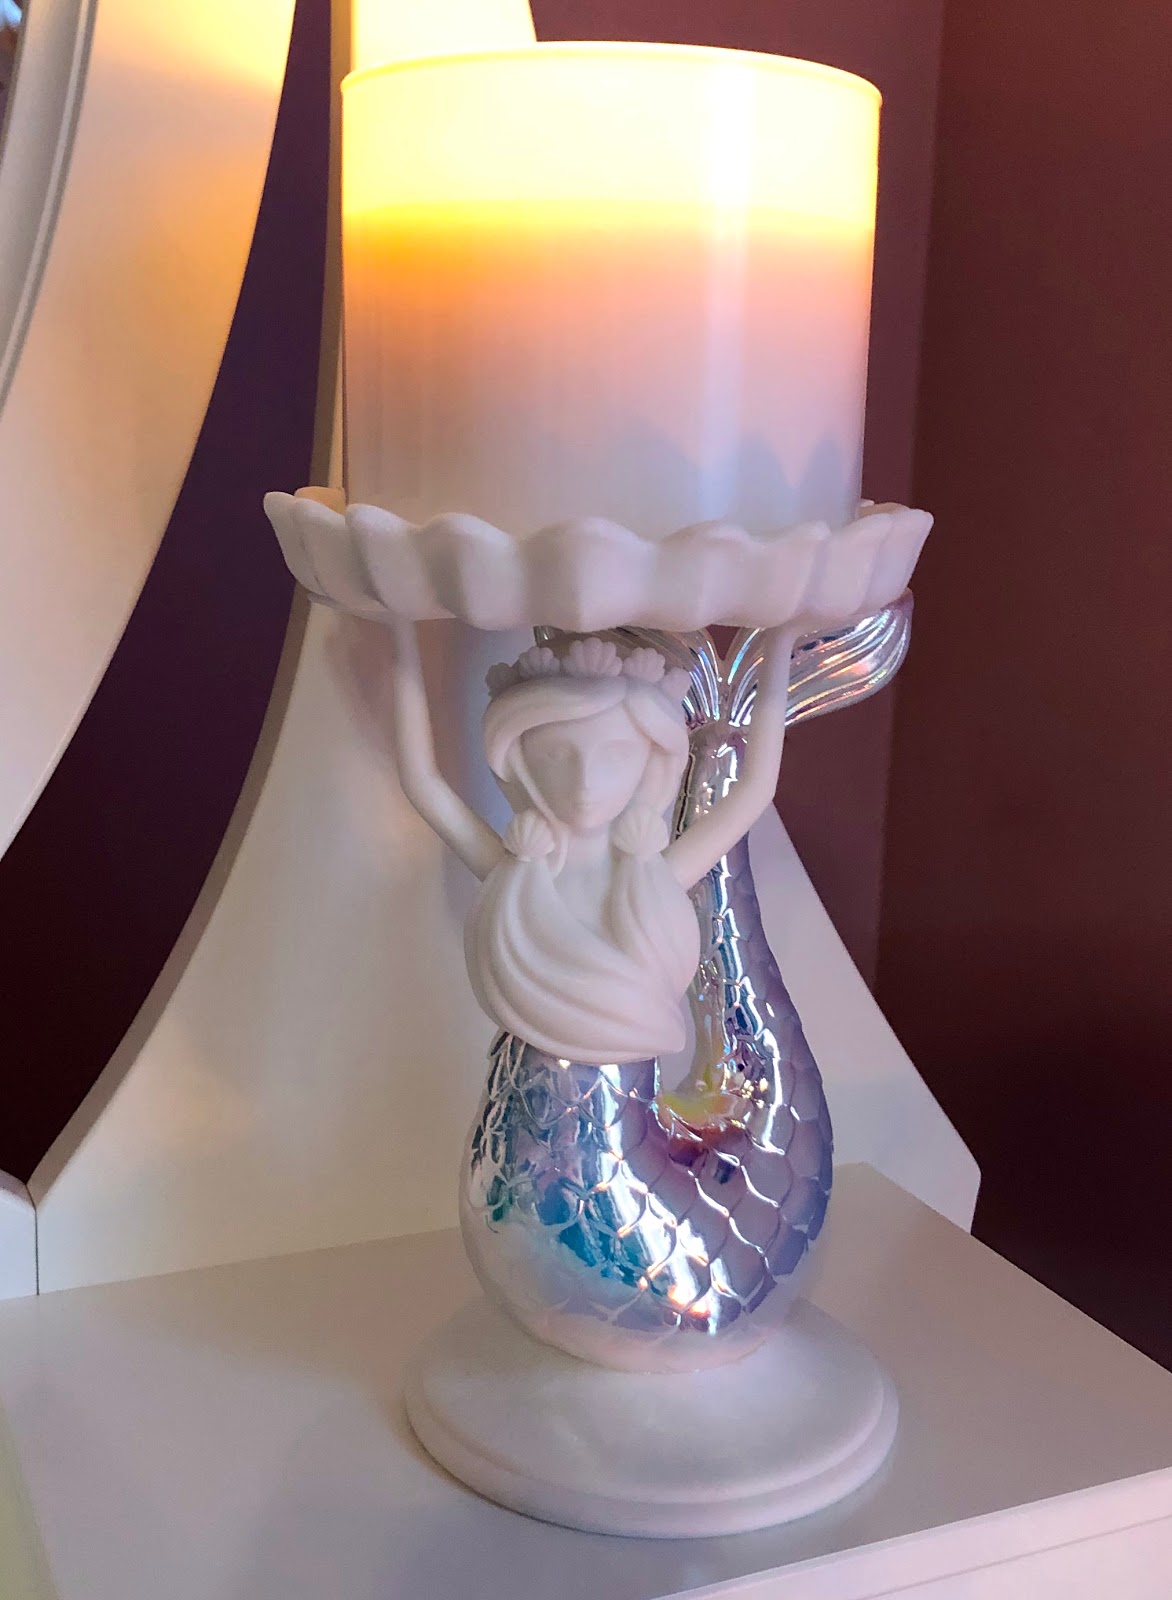 Iridescent Mermaid Pedestal 3-Wick Candle Holder - Bath & Body Works - Blue  Skies for Me Please